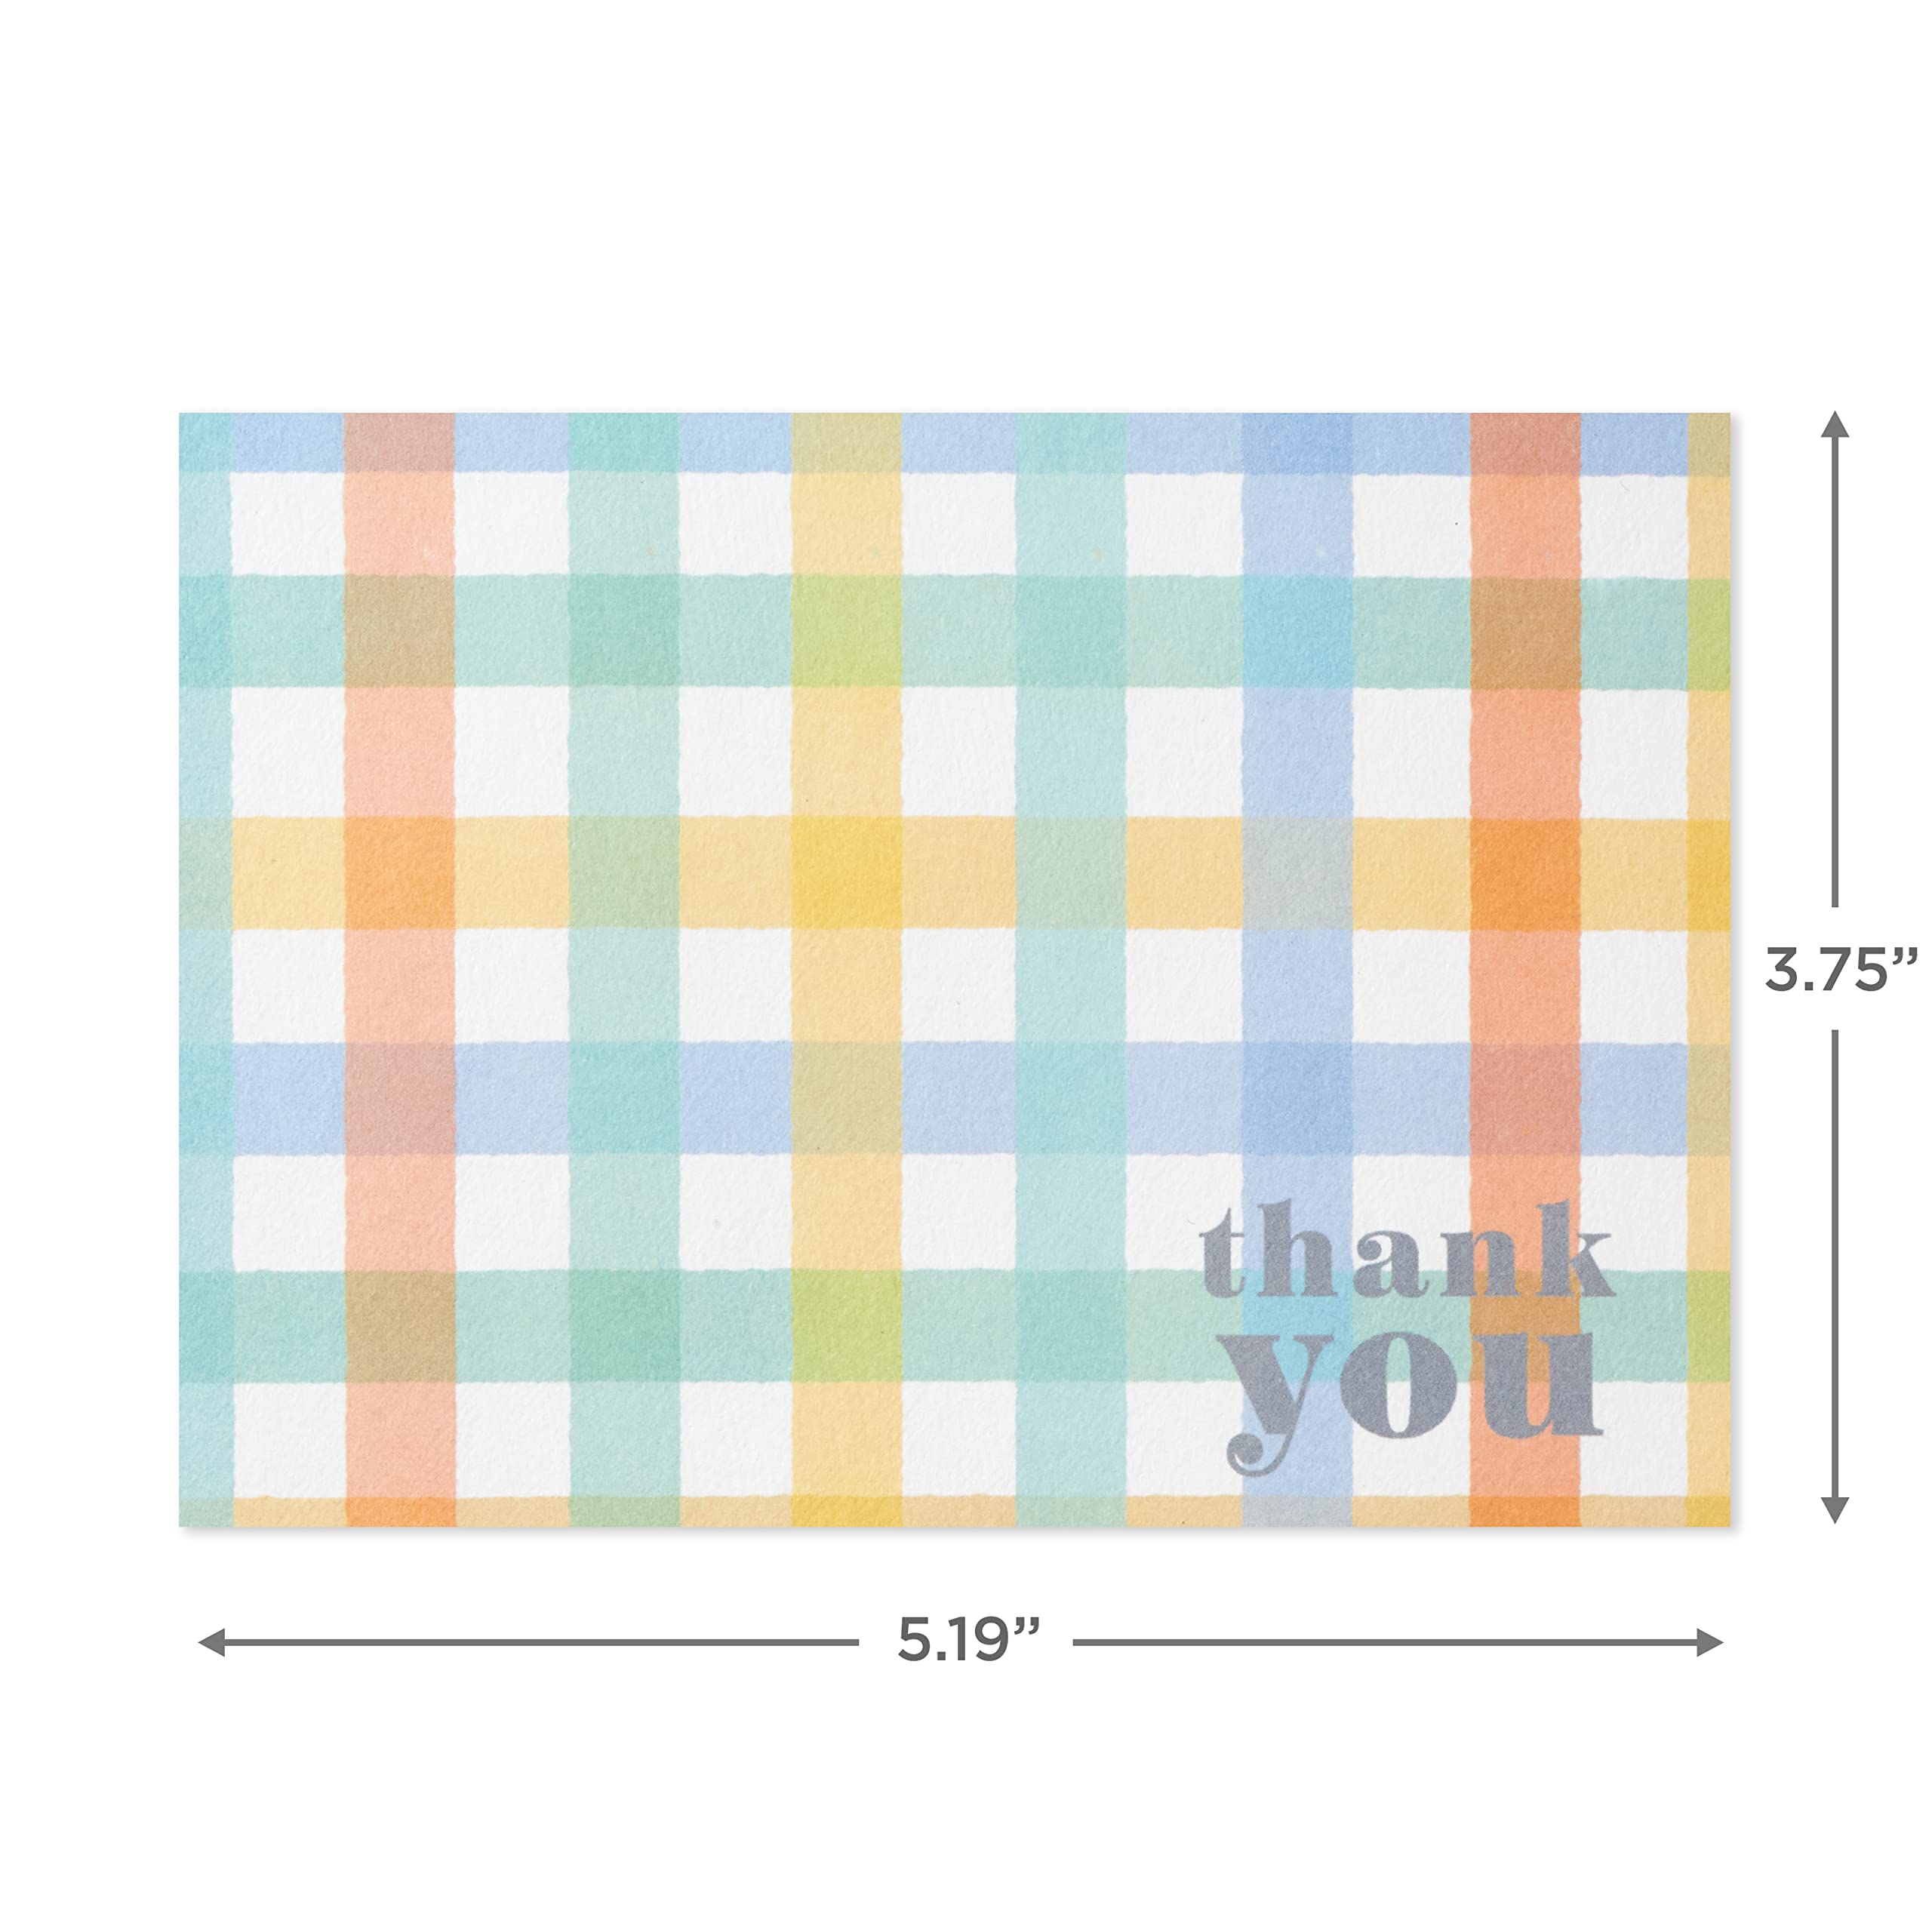 Hallmark Thank You Cards Assortment for Baby, Retro Pastel (48 Cards with Envelopes)